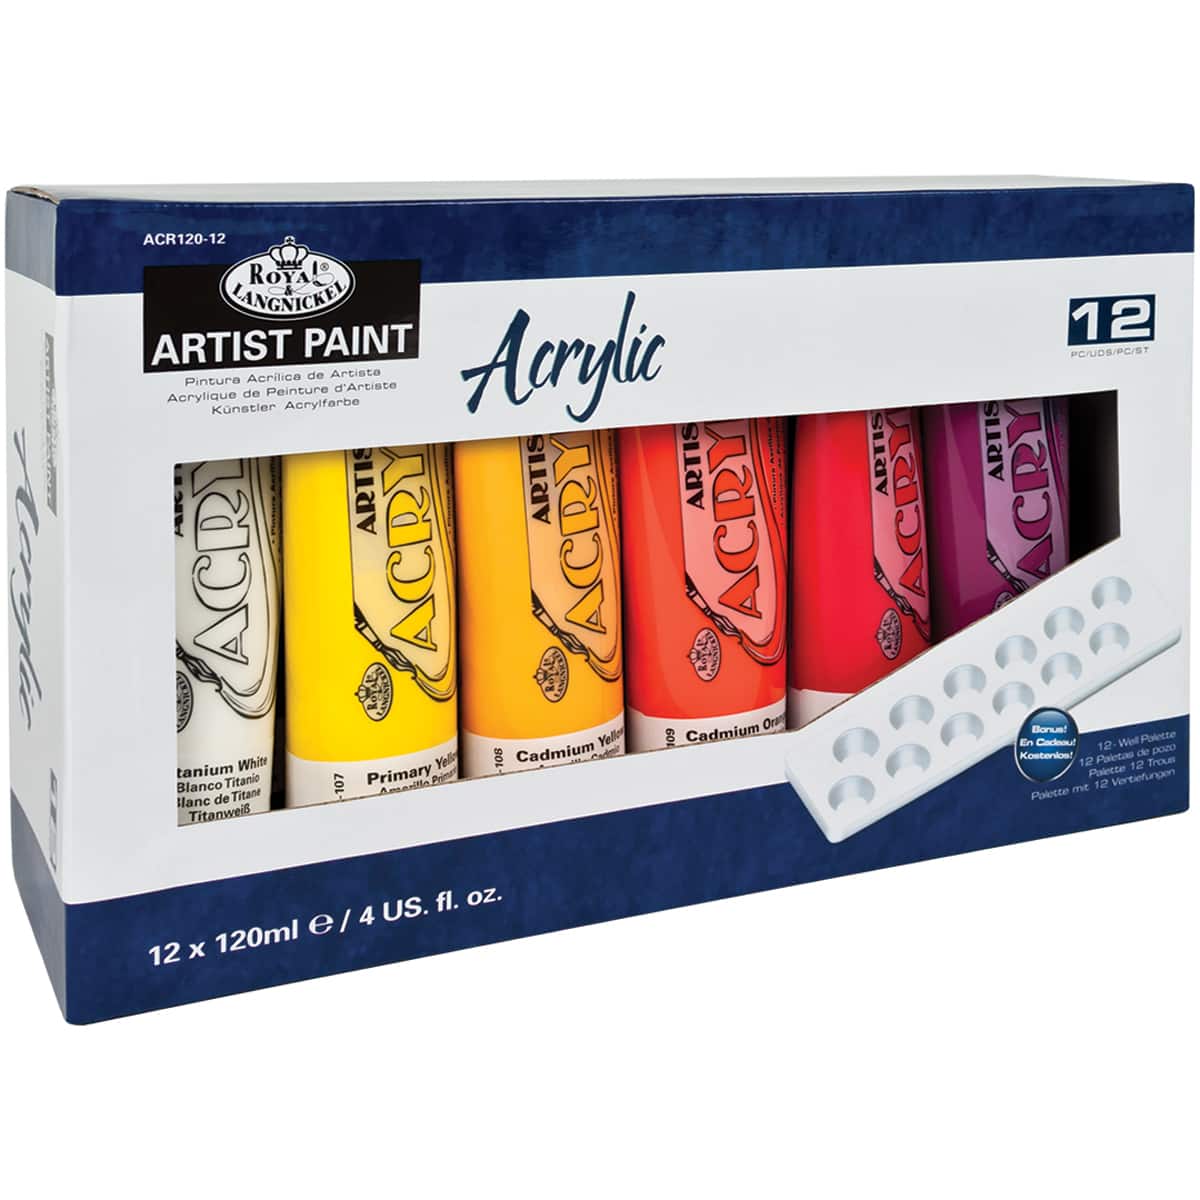 Royal & Langnickel Essentials Acrylic Painting Set, 12 - 12ml colors & 2  brushes, 14pc